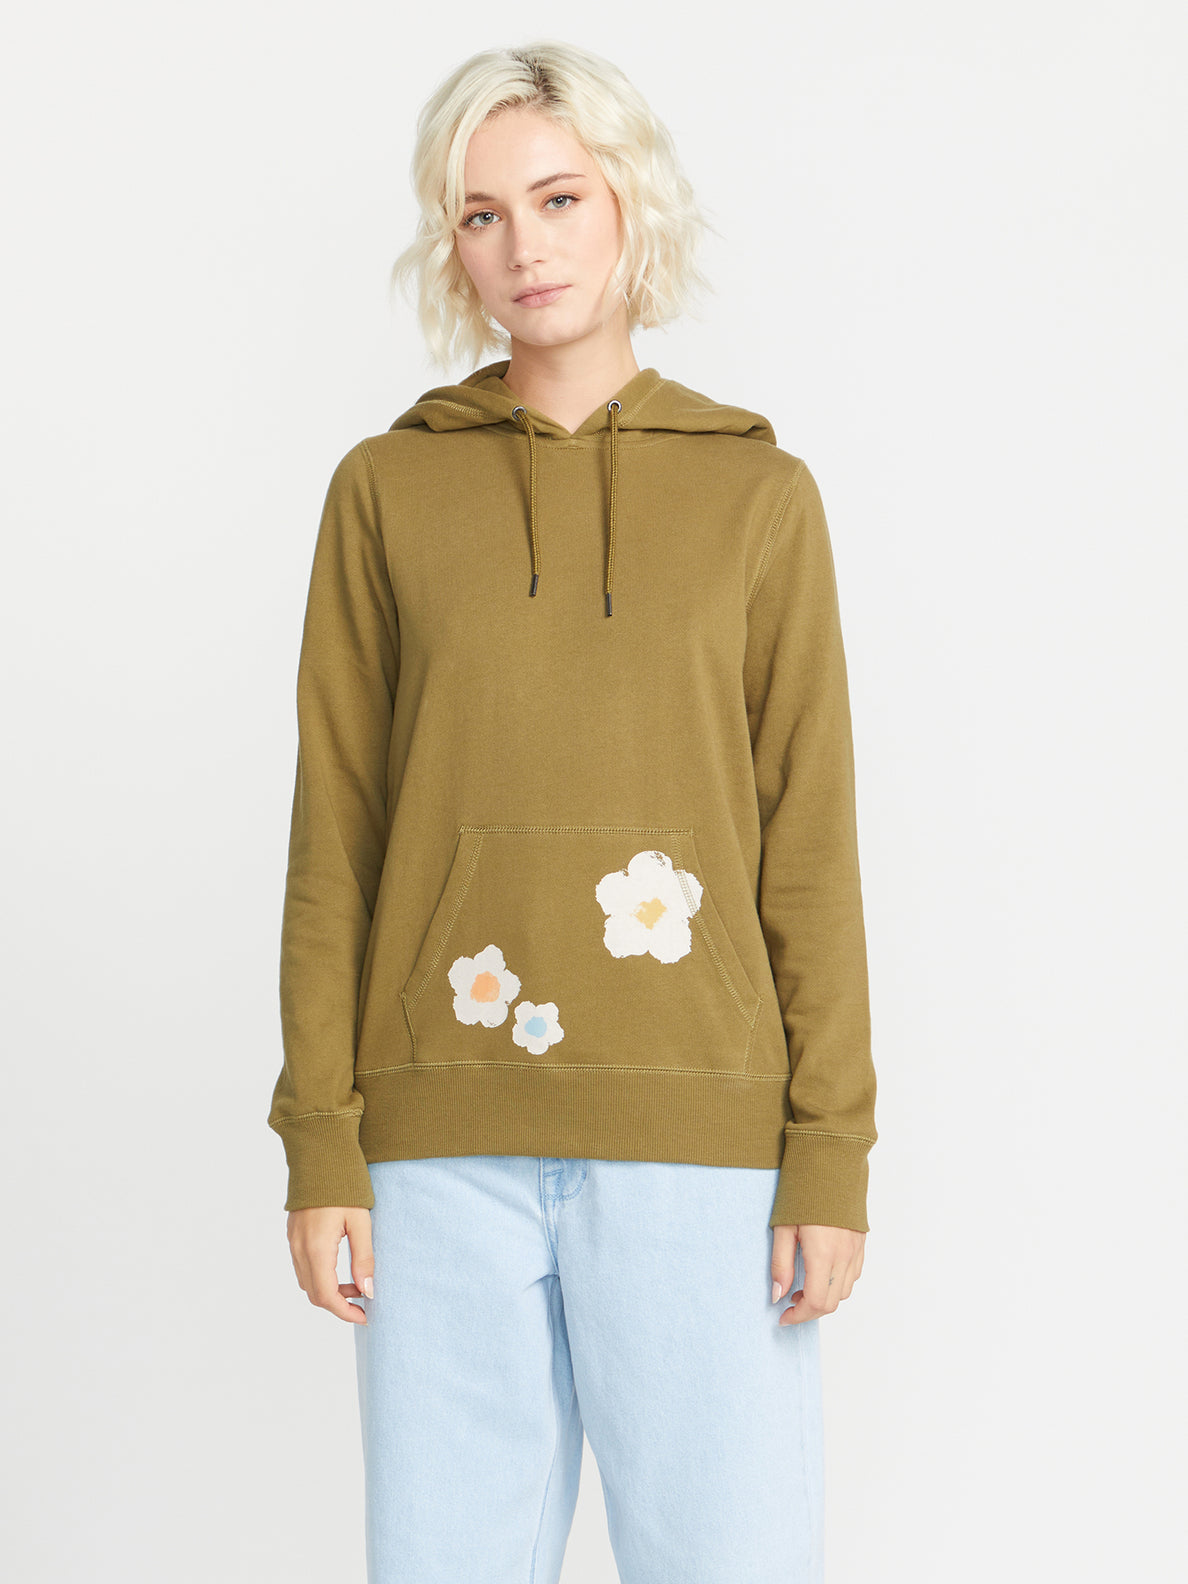 Truly Deal Hoodie - Moss (B4112307_MOS) [F]